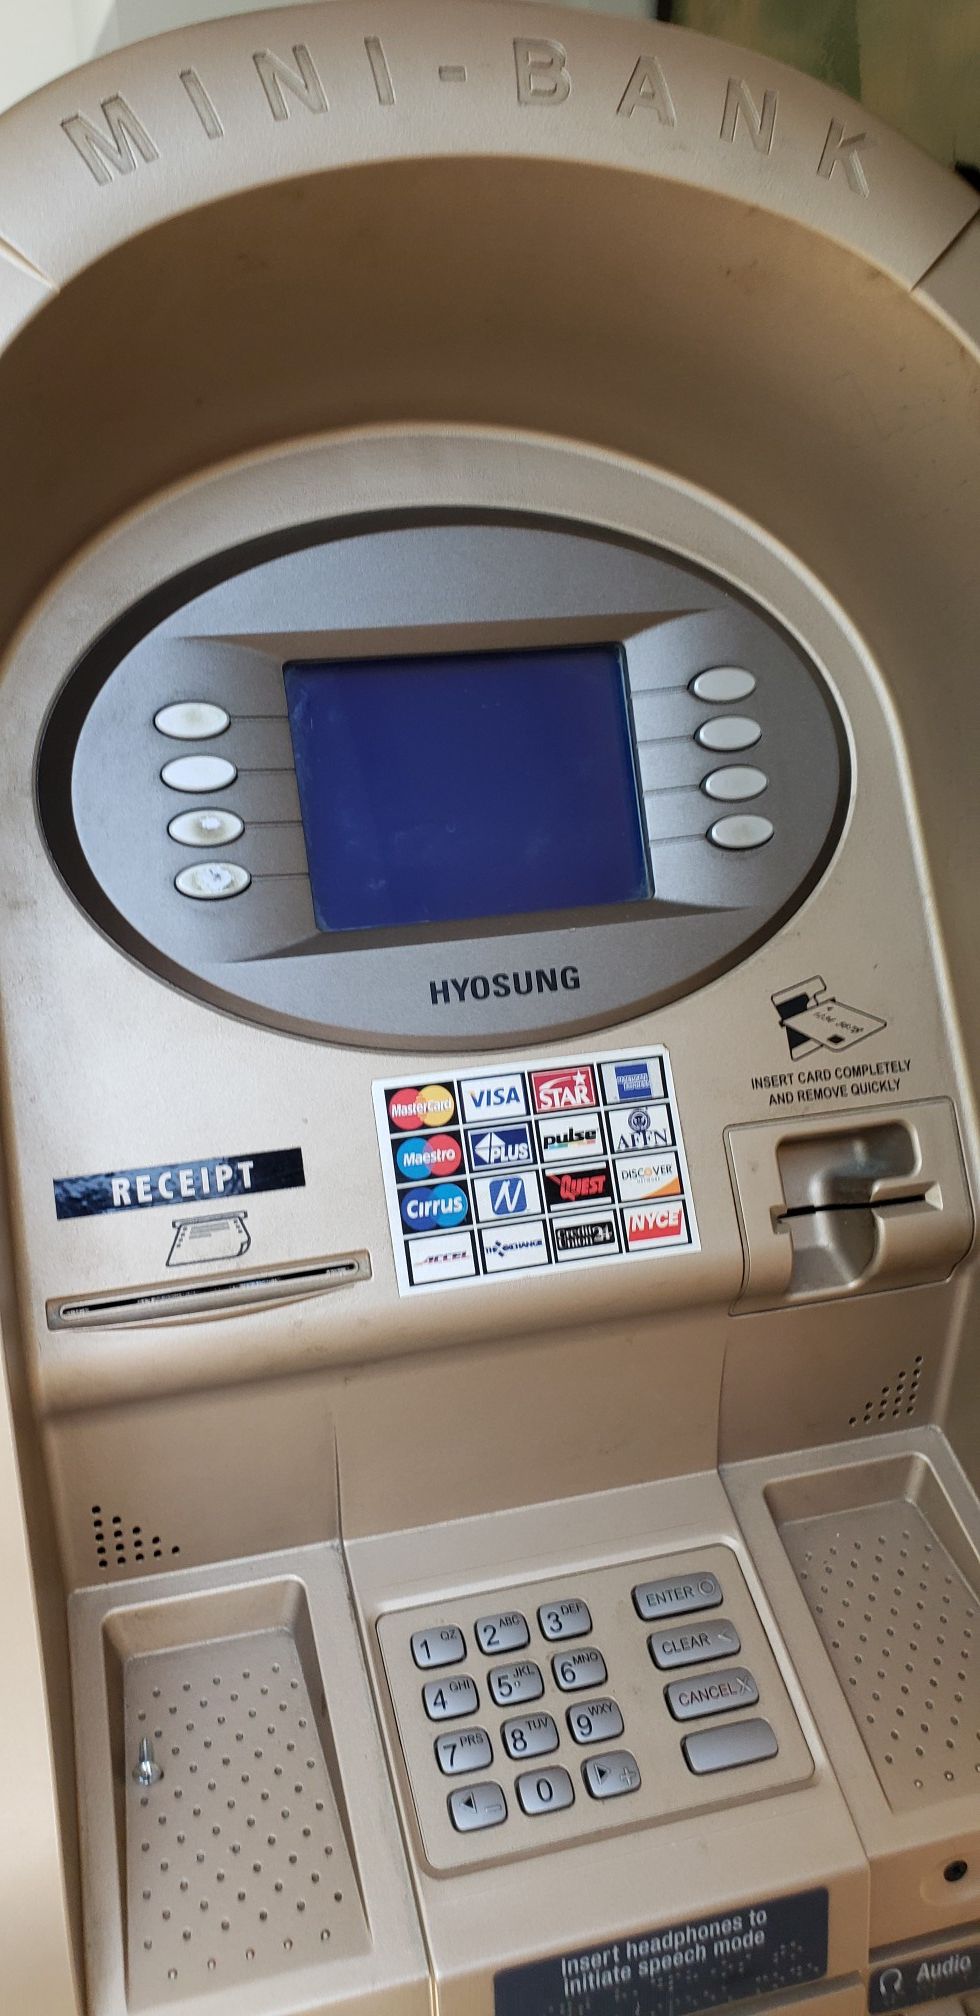 ATM machine for a man cave. Doesn't work but can be repaired. Door hinge is broken.